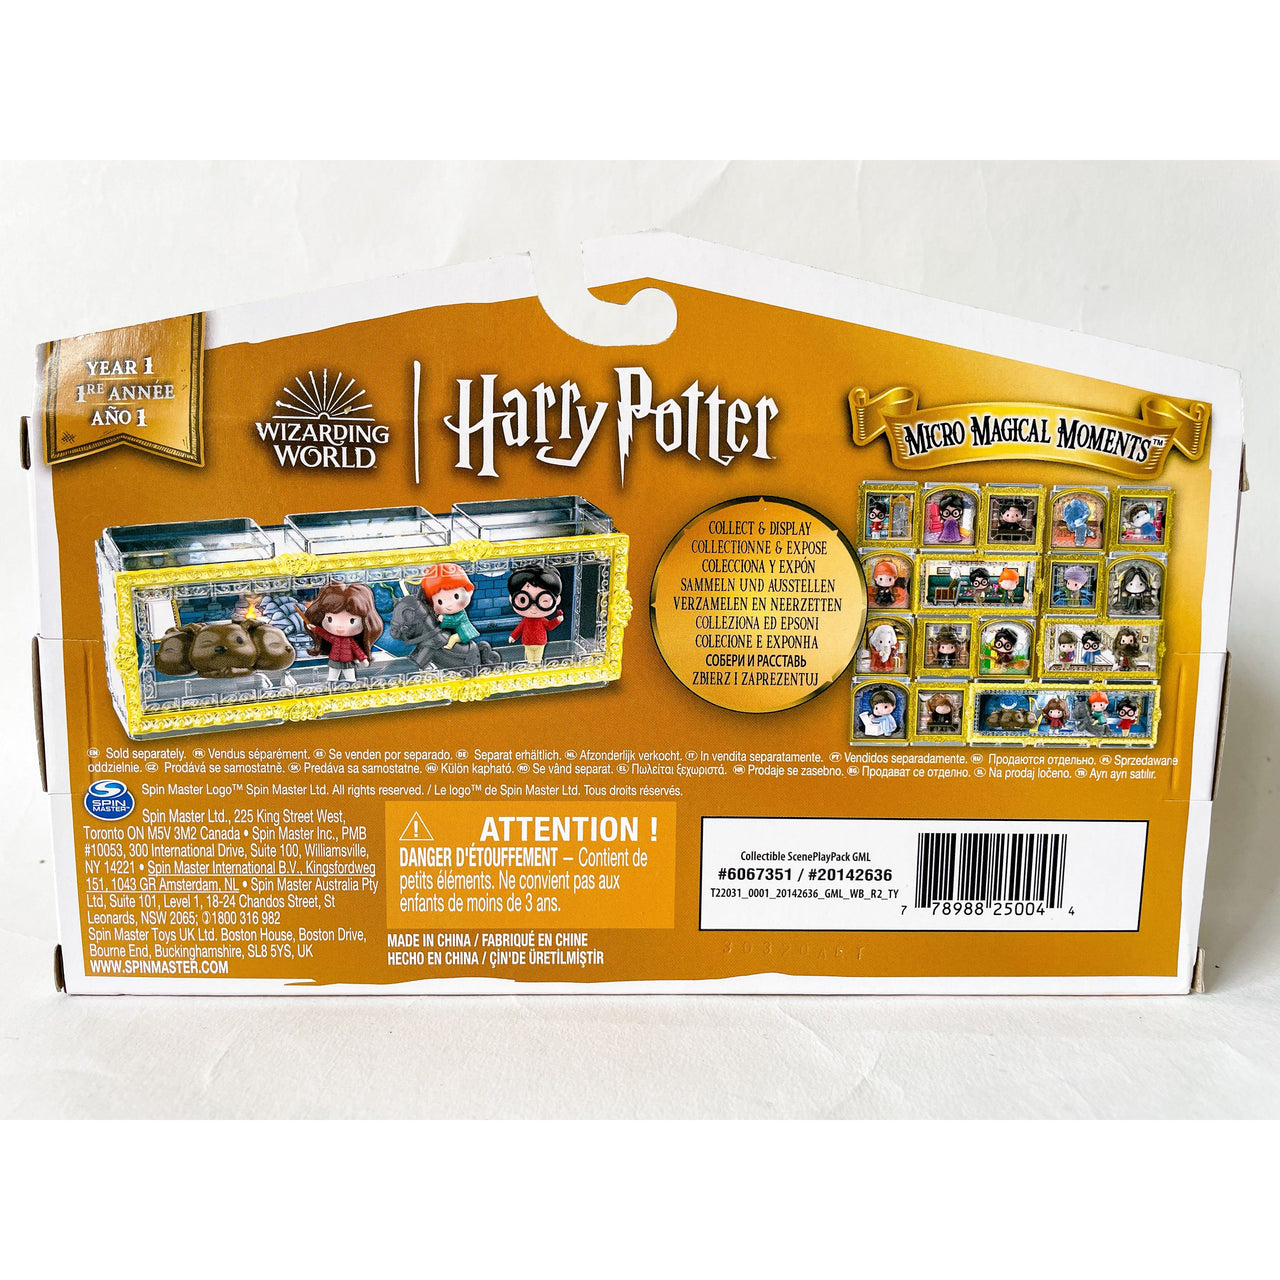 Wizarding World Micro Magical Moments - Fluffy Hermione Ron Harry Harry Potter